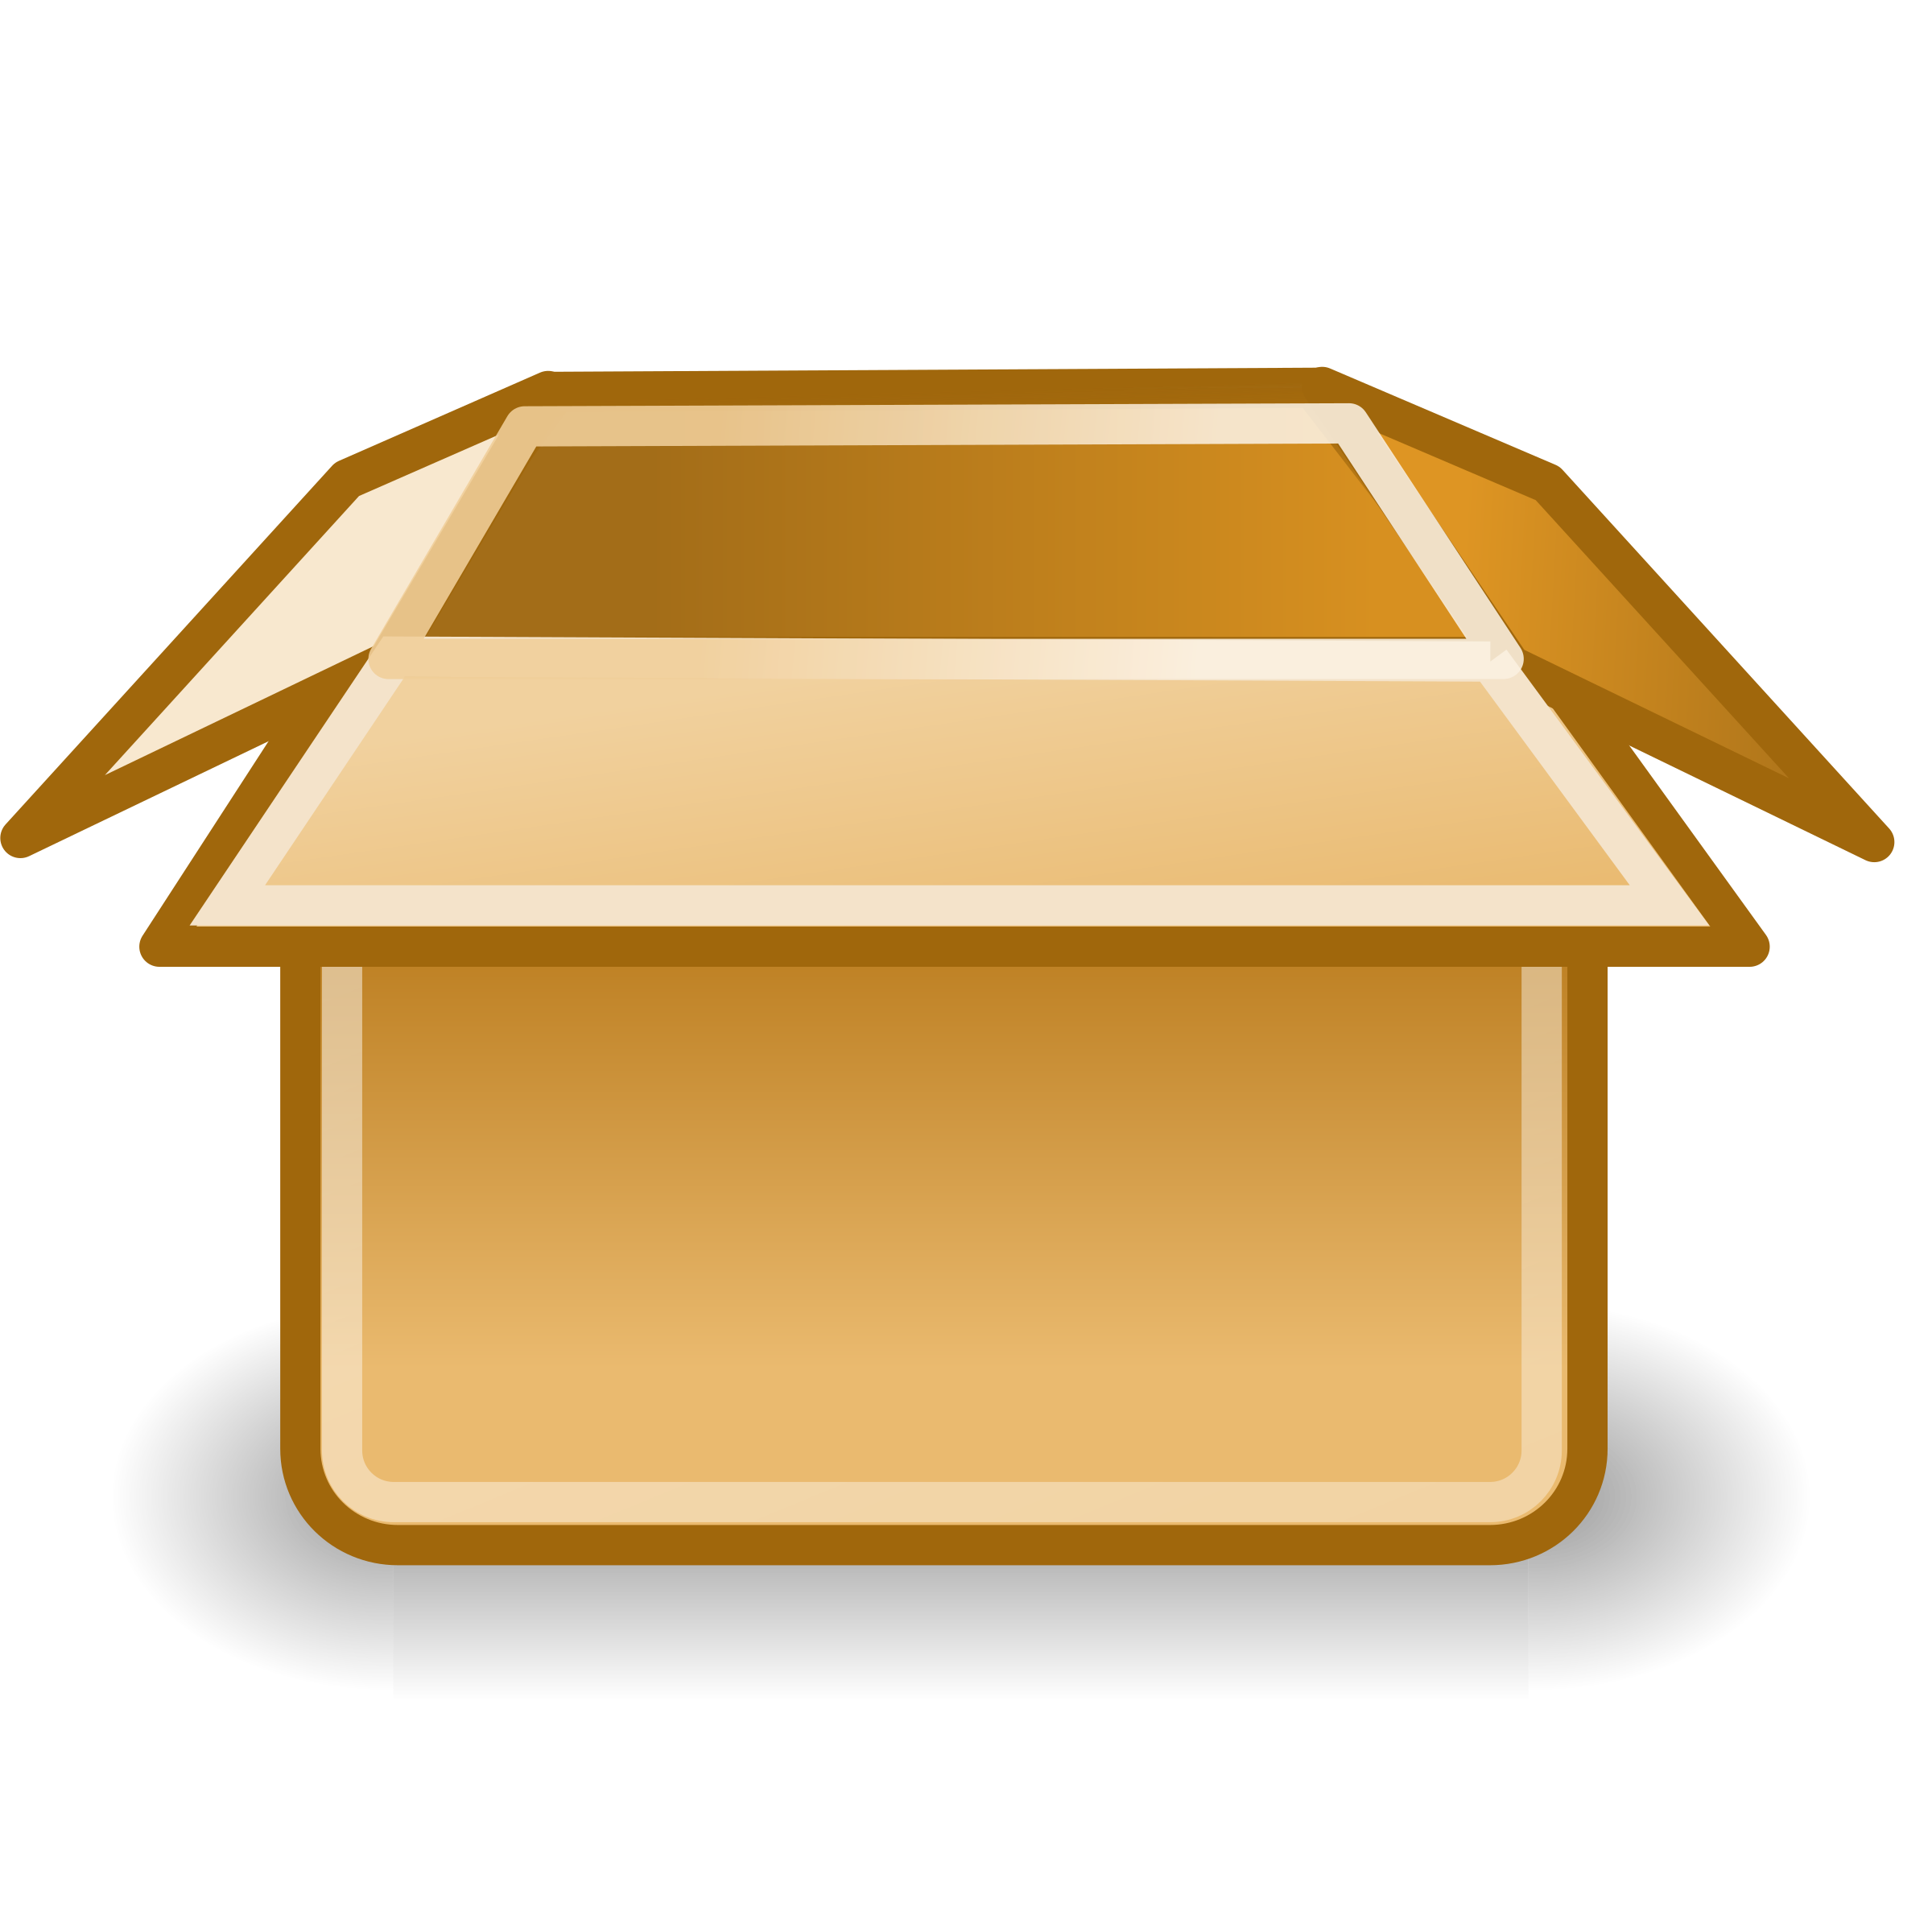 Cardboard boxes clipart